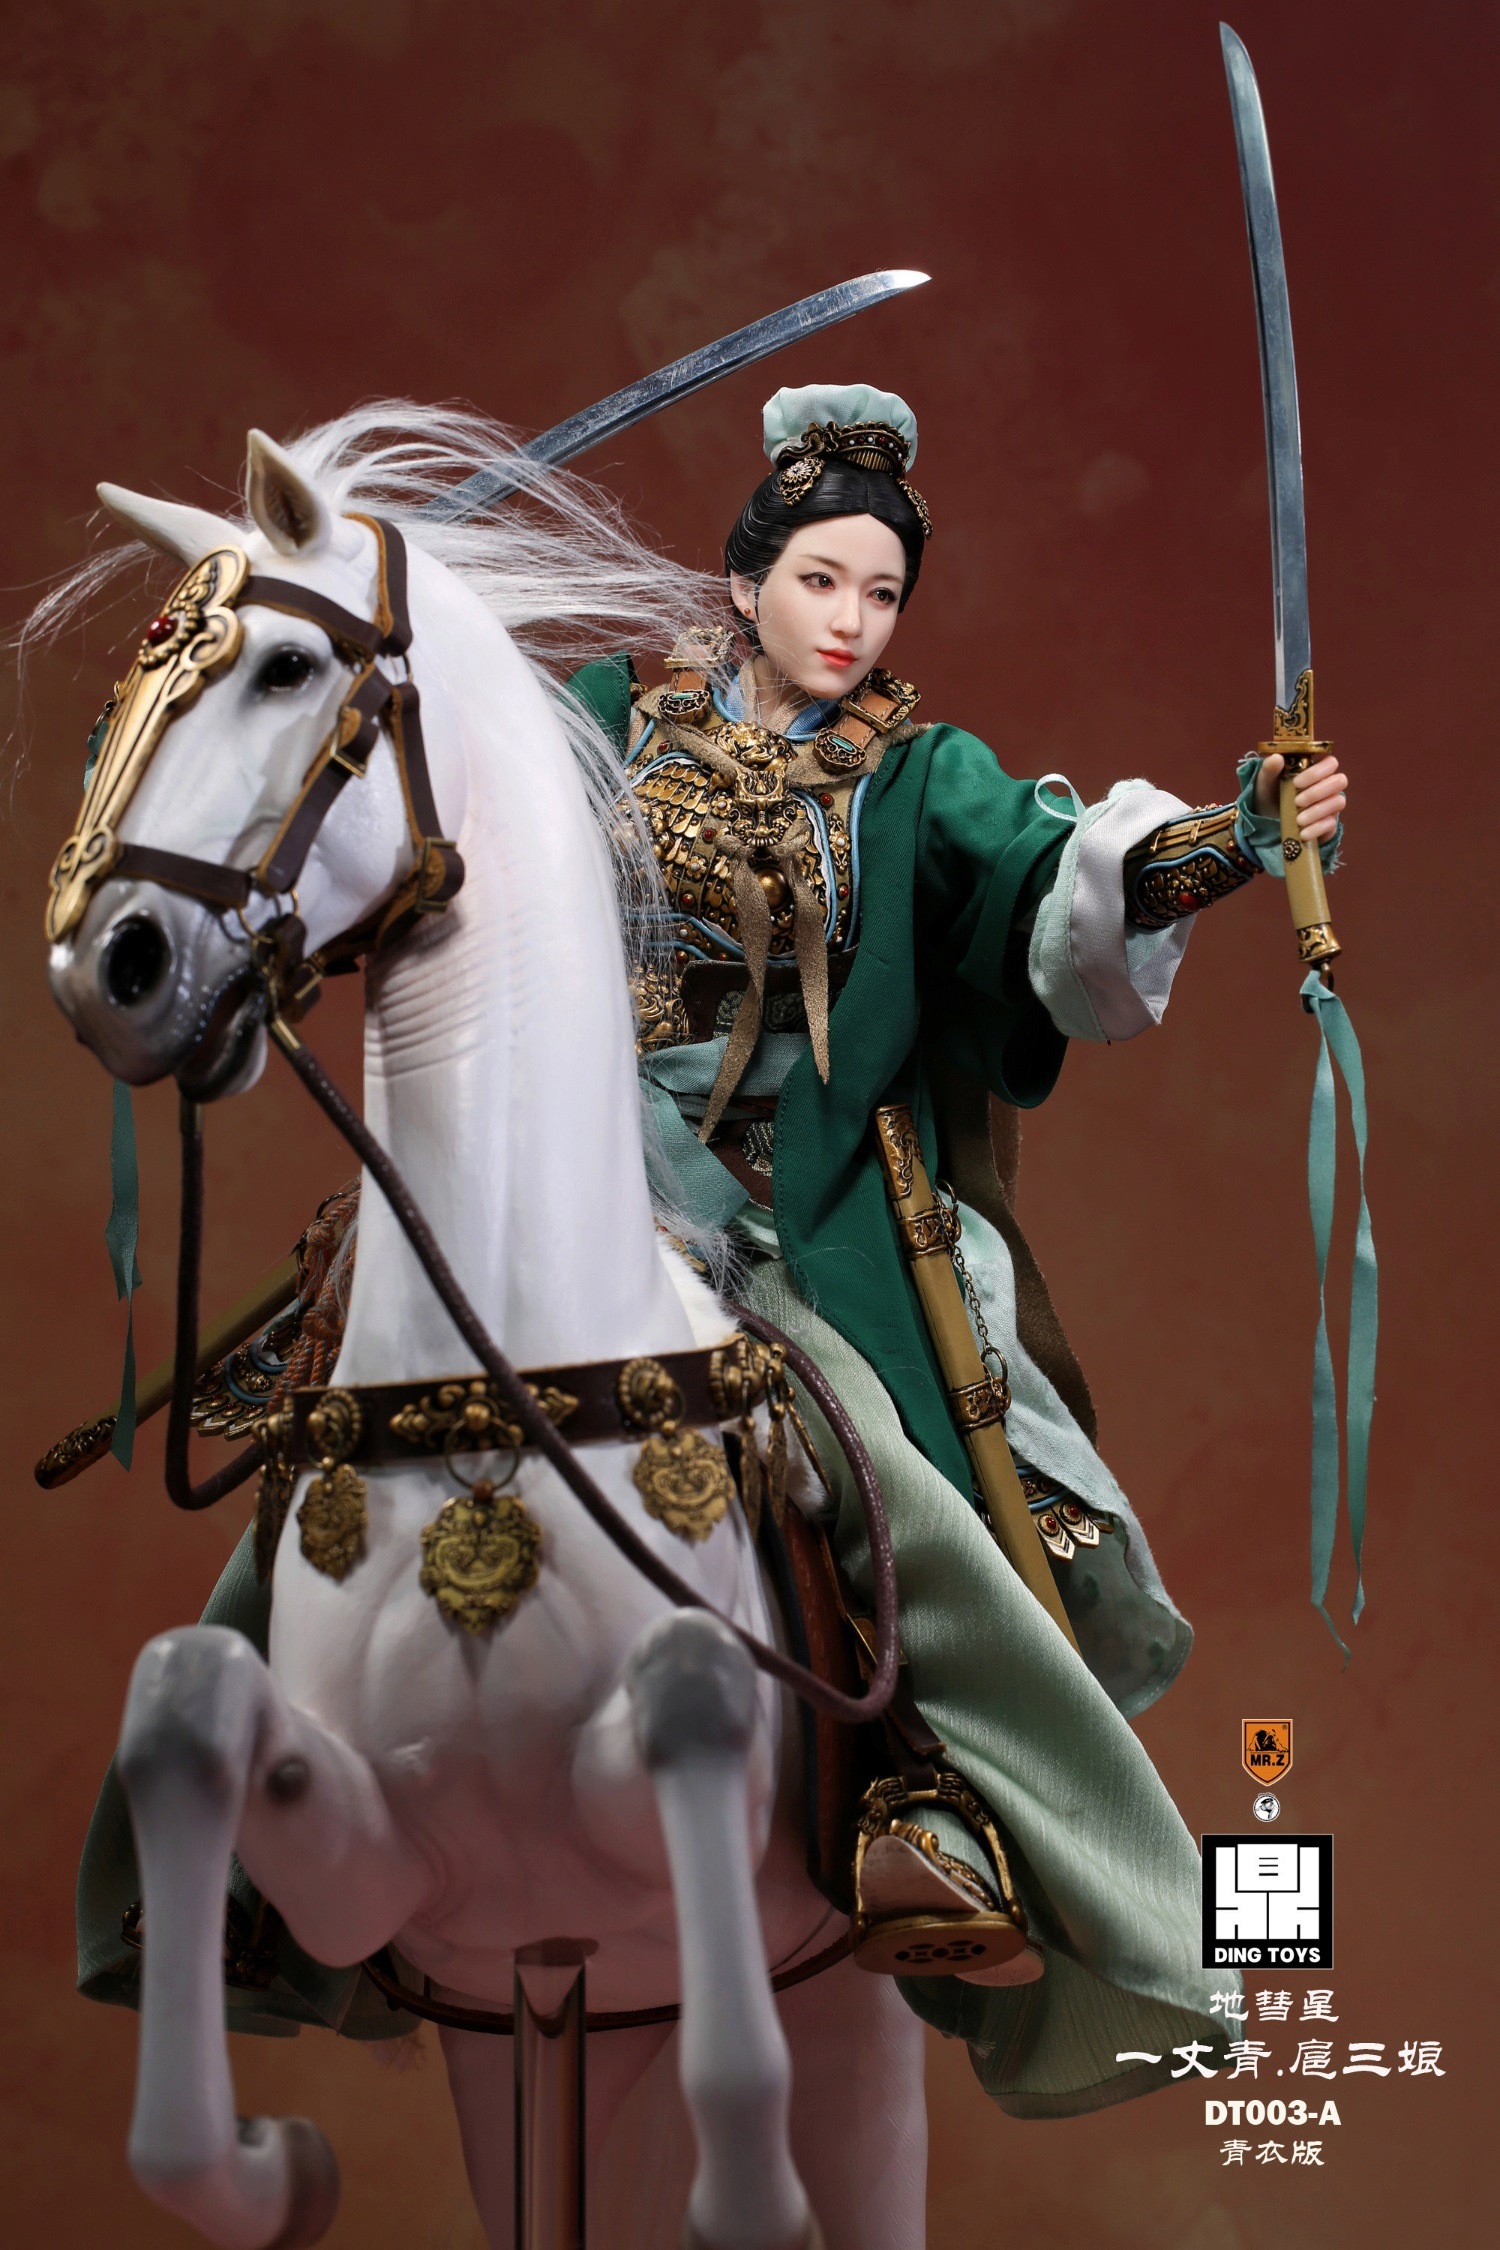 NEW PRODUCT: Mr.Z x Ding Toys DT003 1/6 Scale 《Water Margin》Shiying Zhang (Green and Red versions), Horse (White) 11235